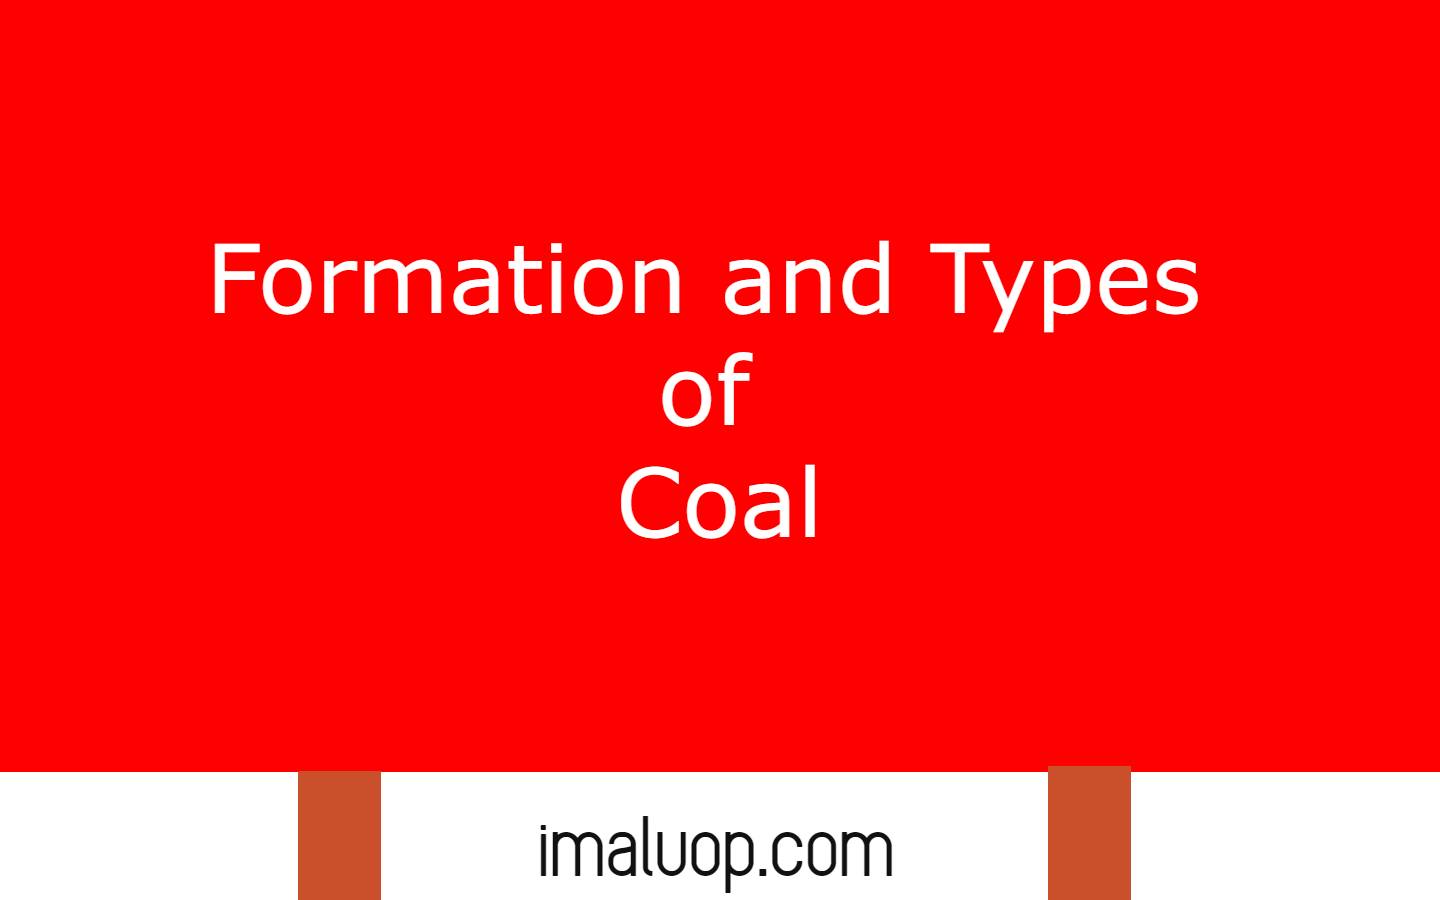 Formation and Types of Coal